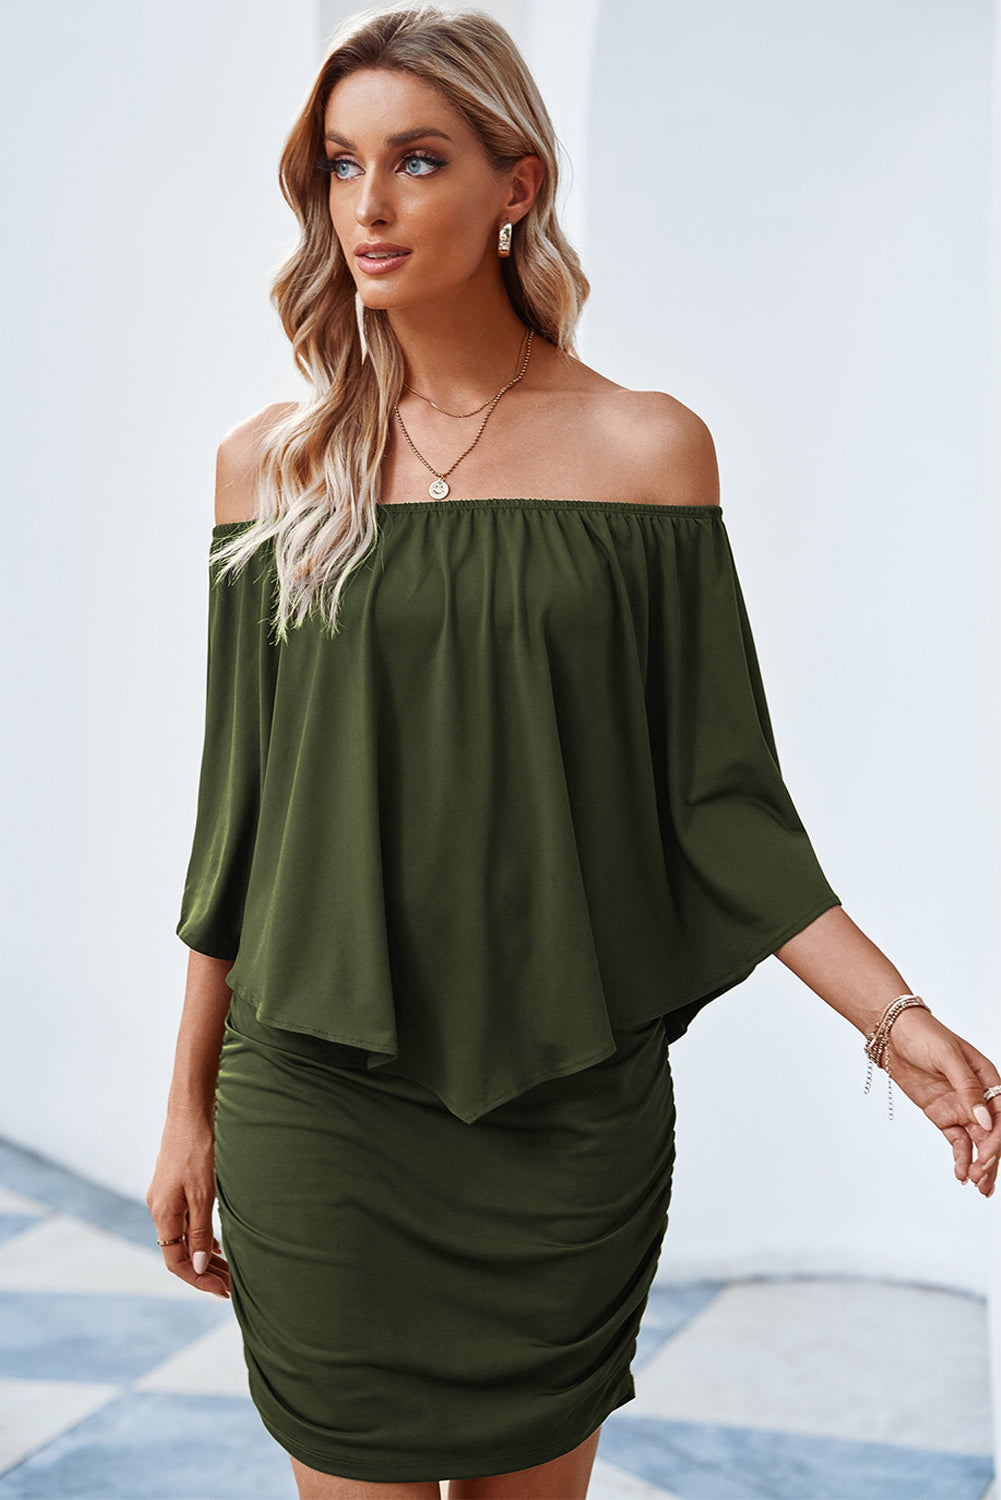 Chic Off-Shoulder Dress - The Exclusive Emerald